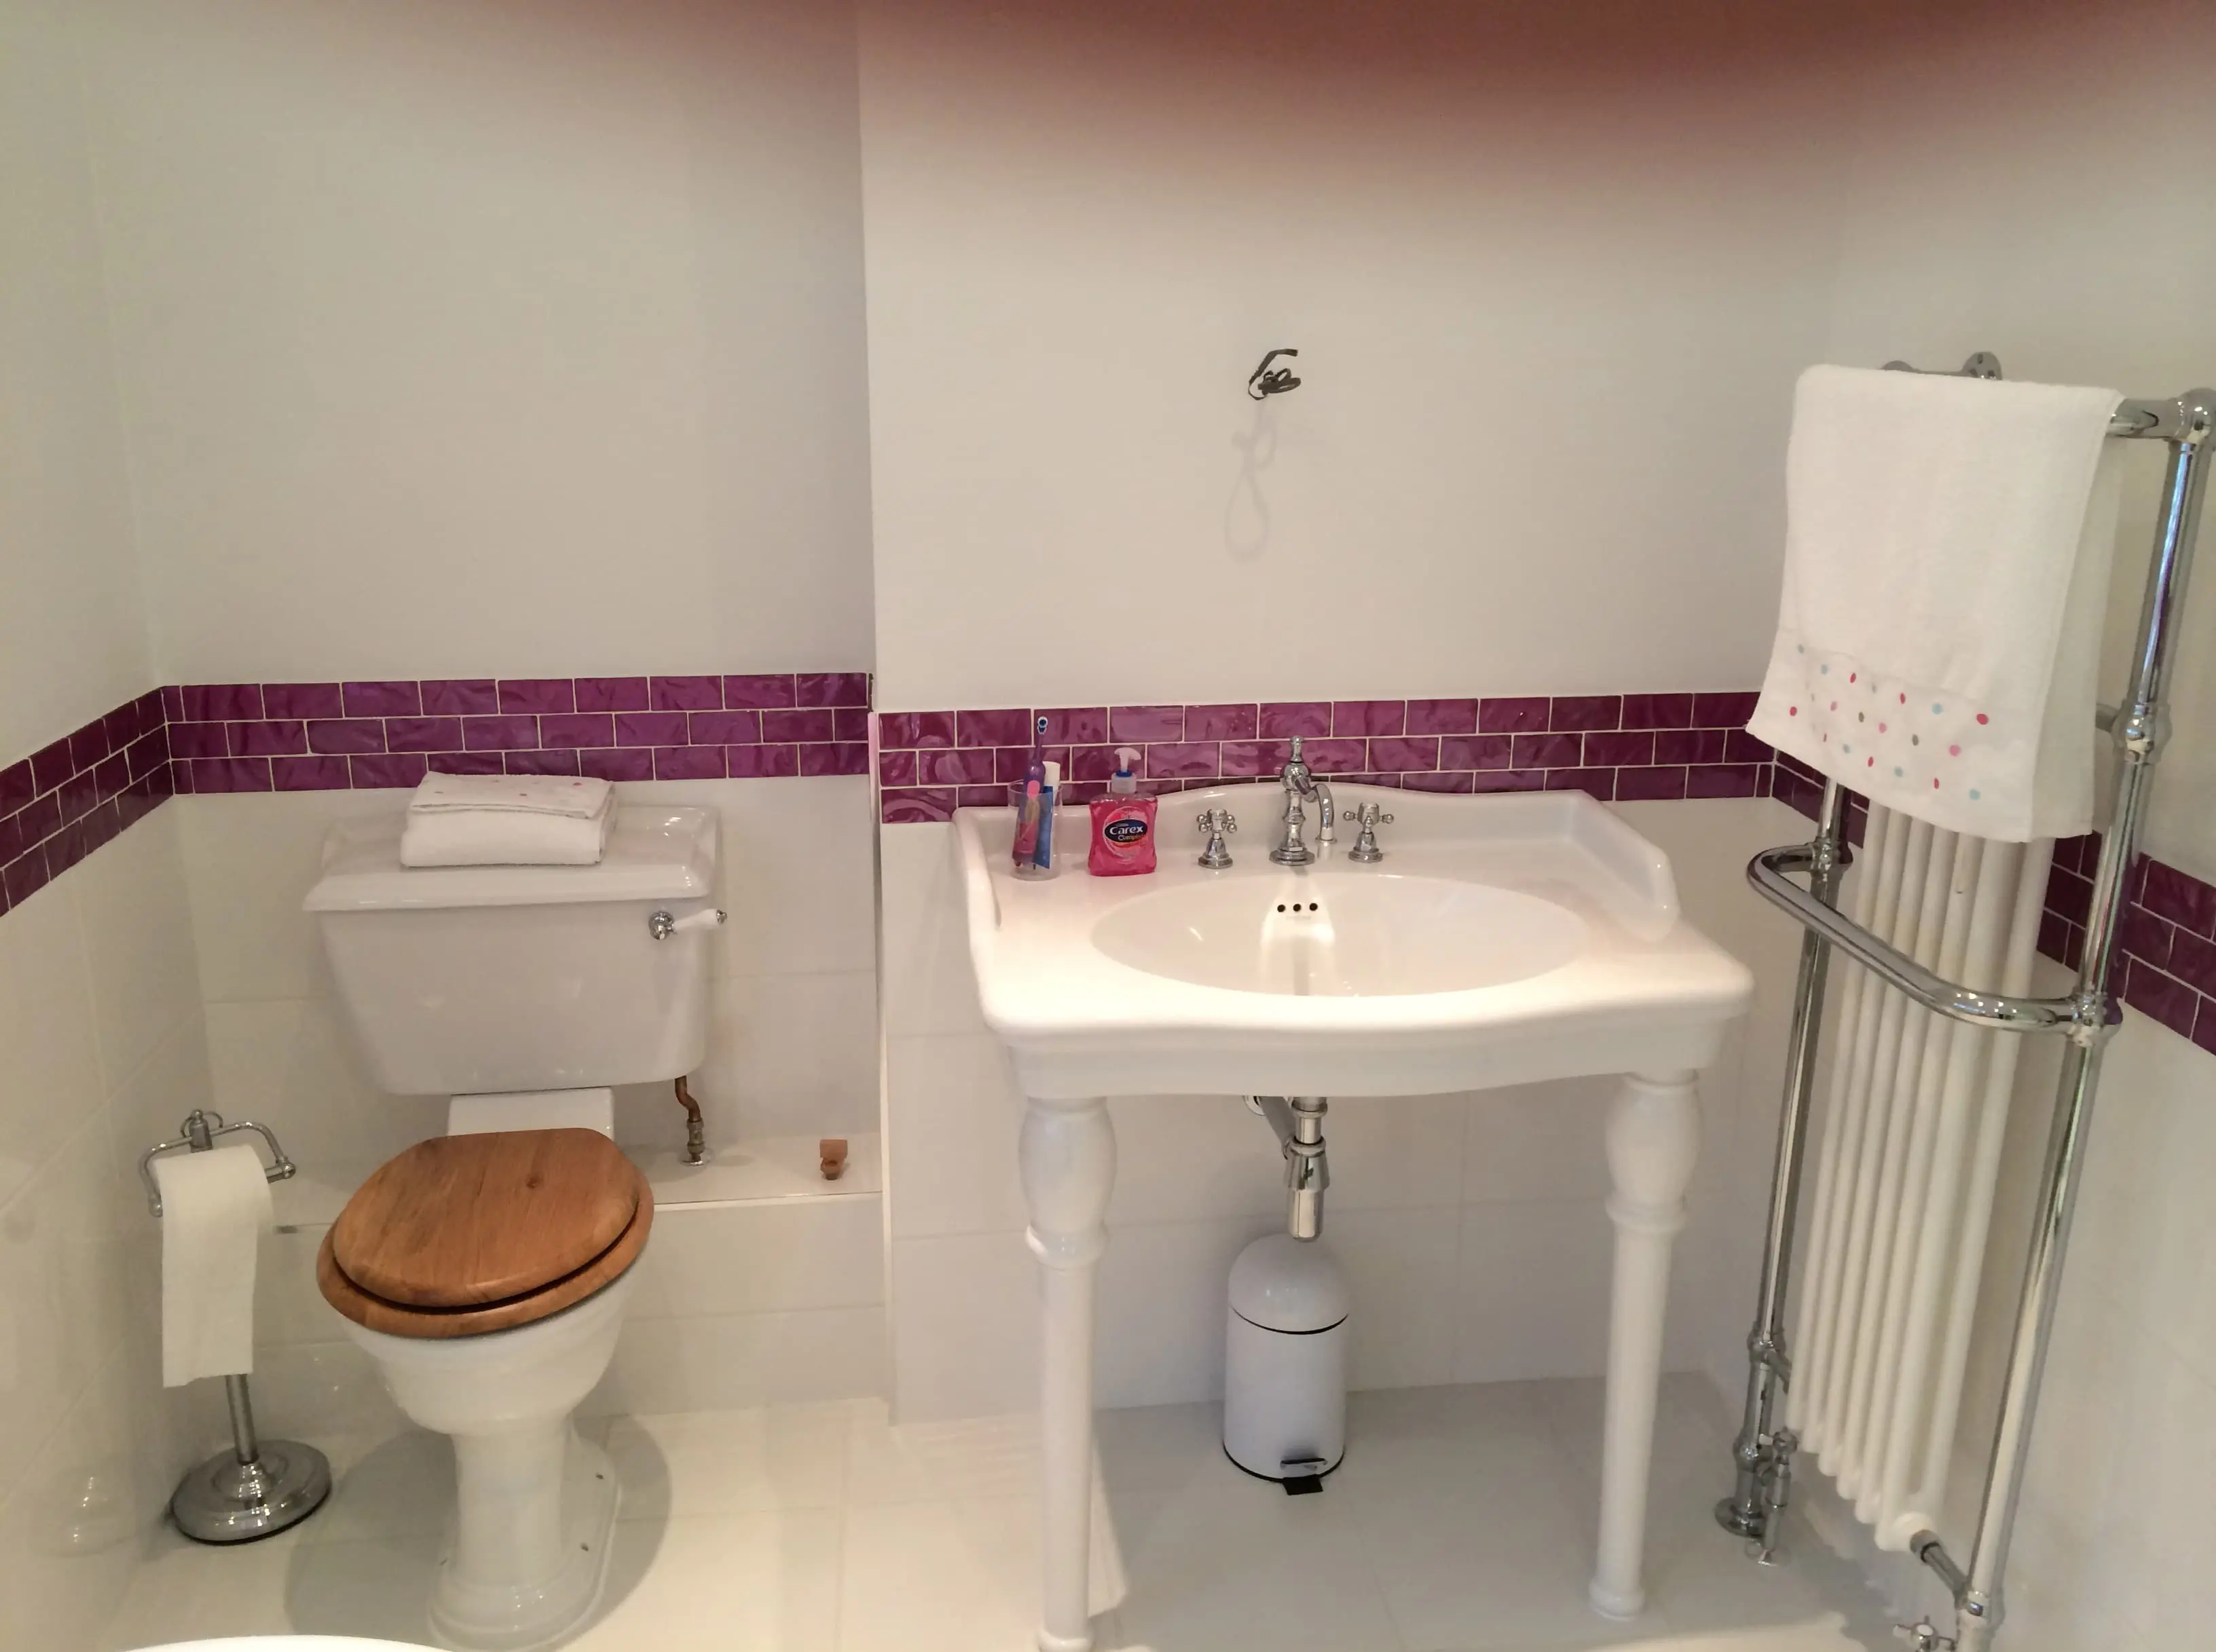 At Plumbing 4 U, we can tailor our tiling services&nbsp;to suit your budget.The team are fully qualified, with over 40 years of experience in the tiling industry, so you can be sure you are in good hands.&nbsp;In addition to tiling, we also offer plumbing and&nbsp;bathroom&nbsp;installations.Why not give us a&nbsp;call today to discuss your requirements for&nbsp;tiling services in Arborfield?